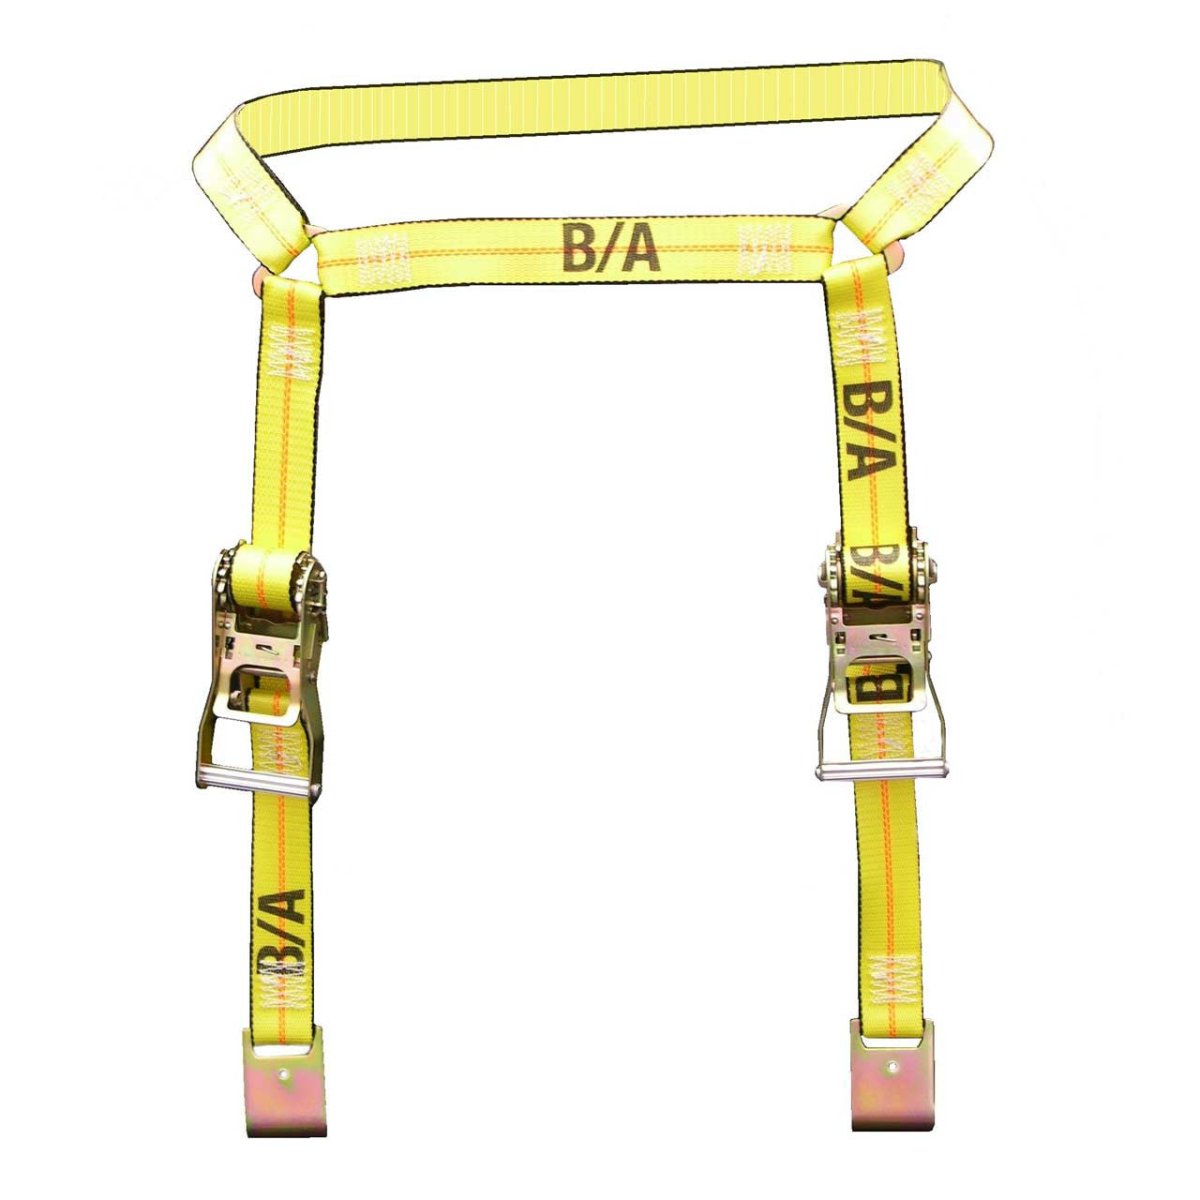 B/A Products Co. 2" x 8' Flat Hook Side Rail Ratchet Tie-Down Assembly - 38-65A - starequipmentsales